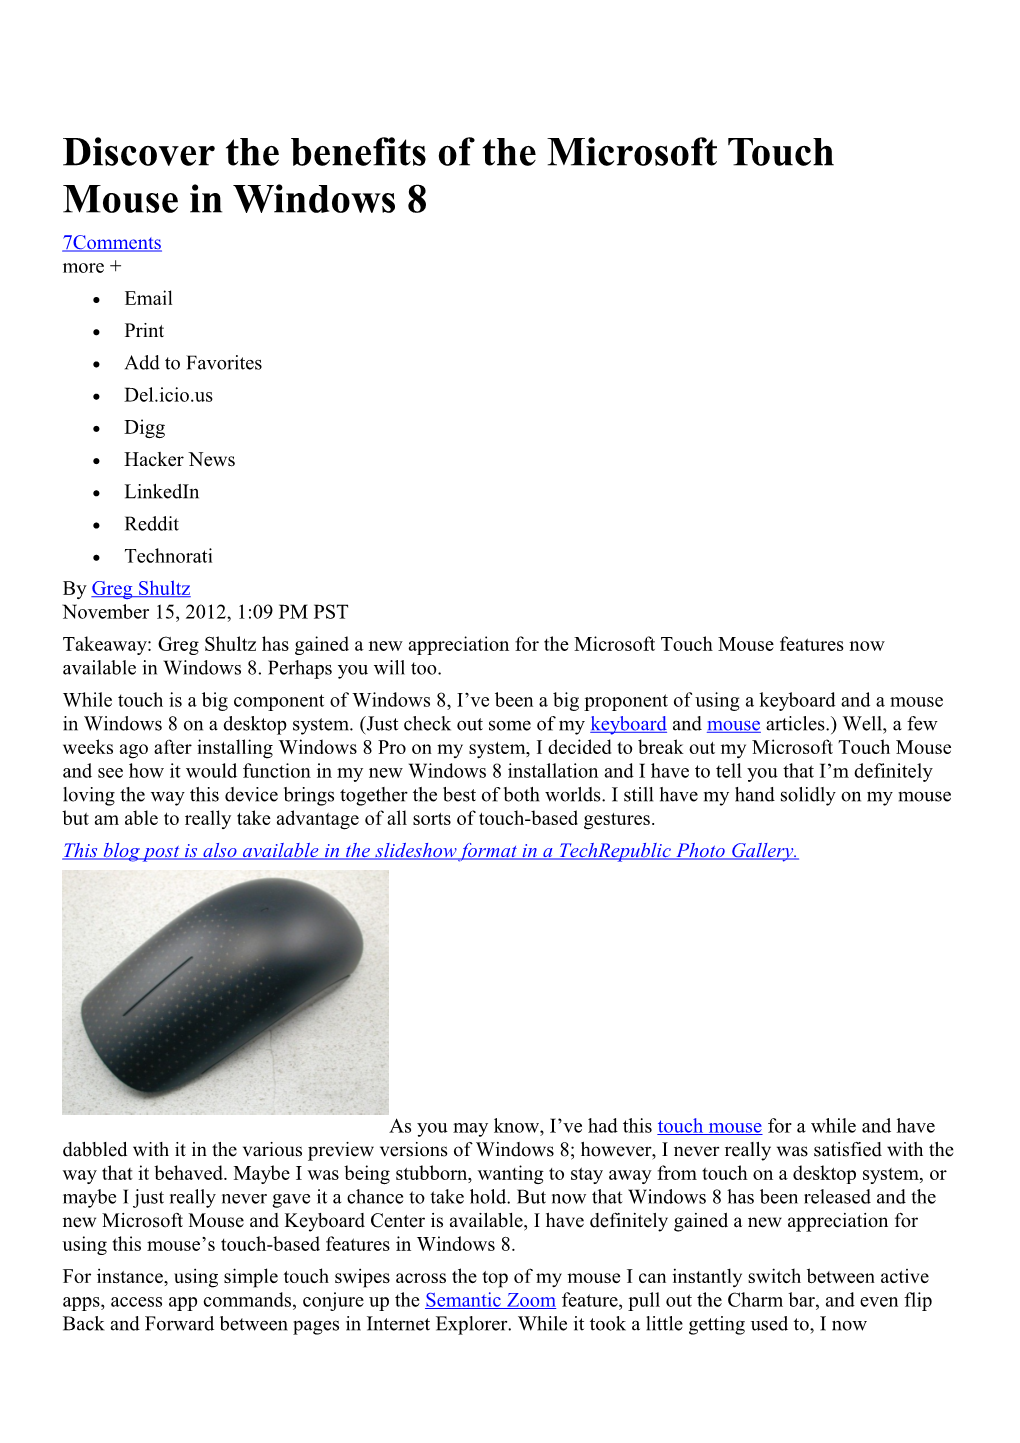 Discover the Benefits of the Microsoft Touch Mouse in Windows 8